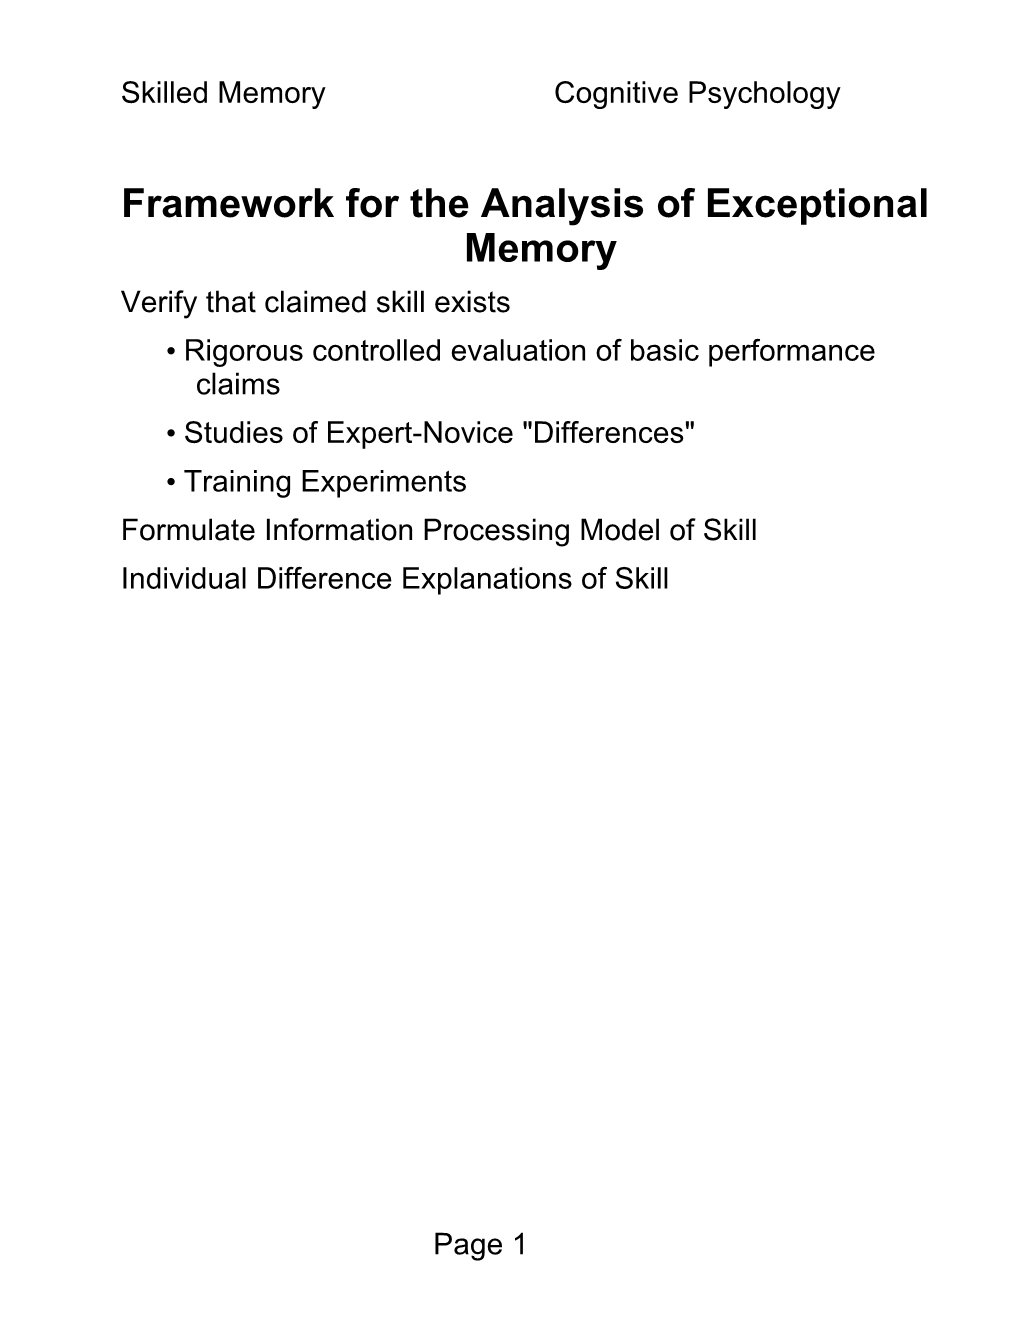 Framework for the Analysis of Exceptional Memory